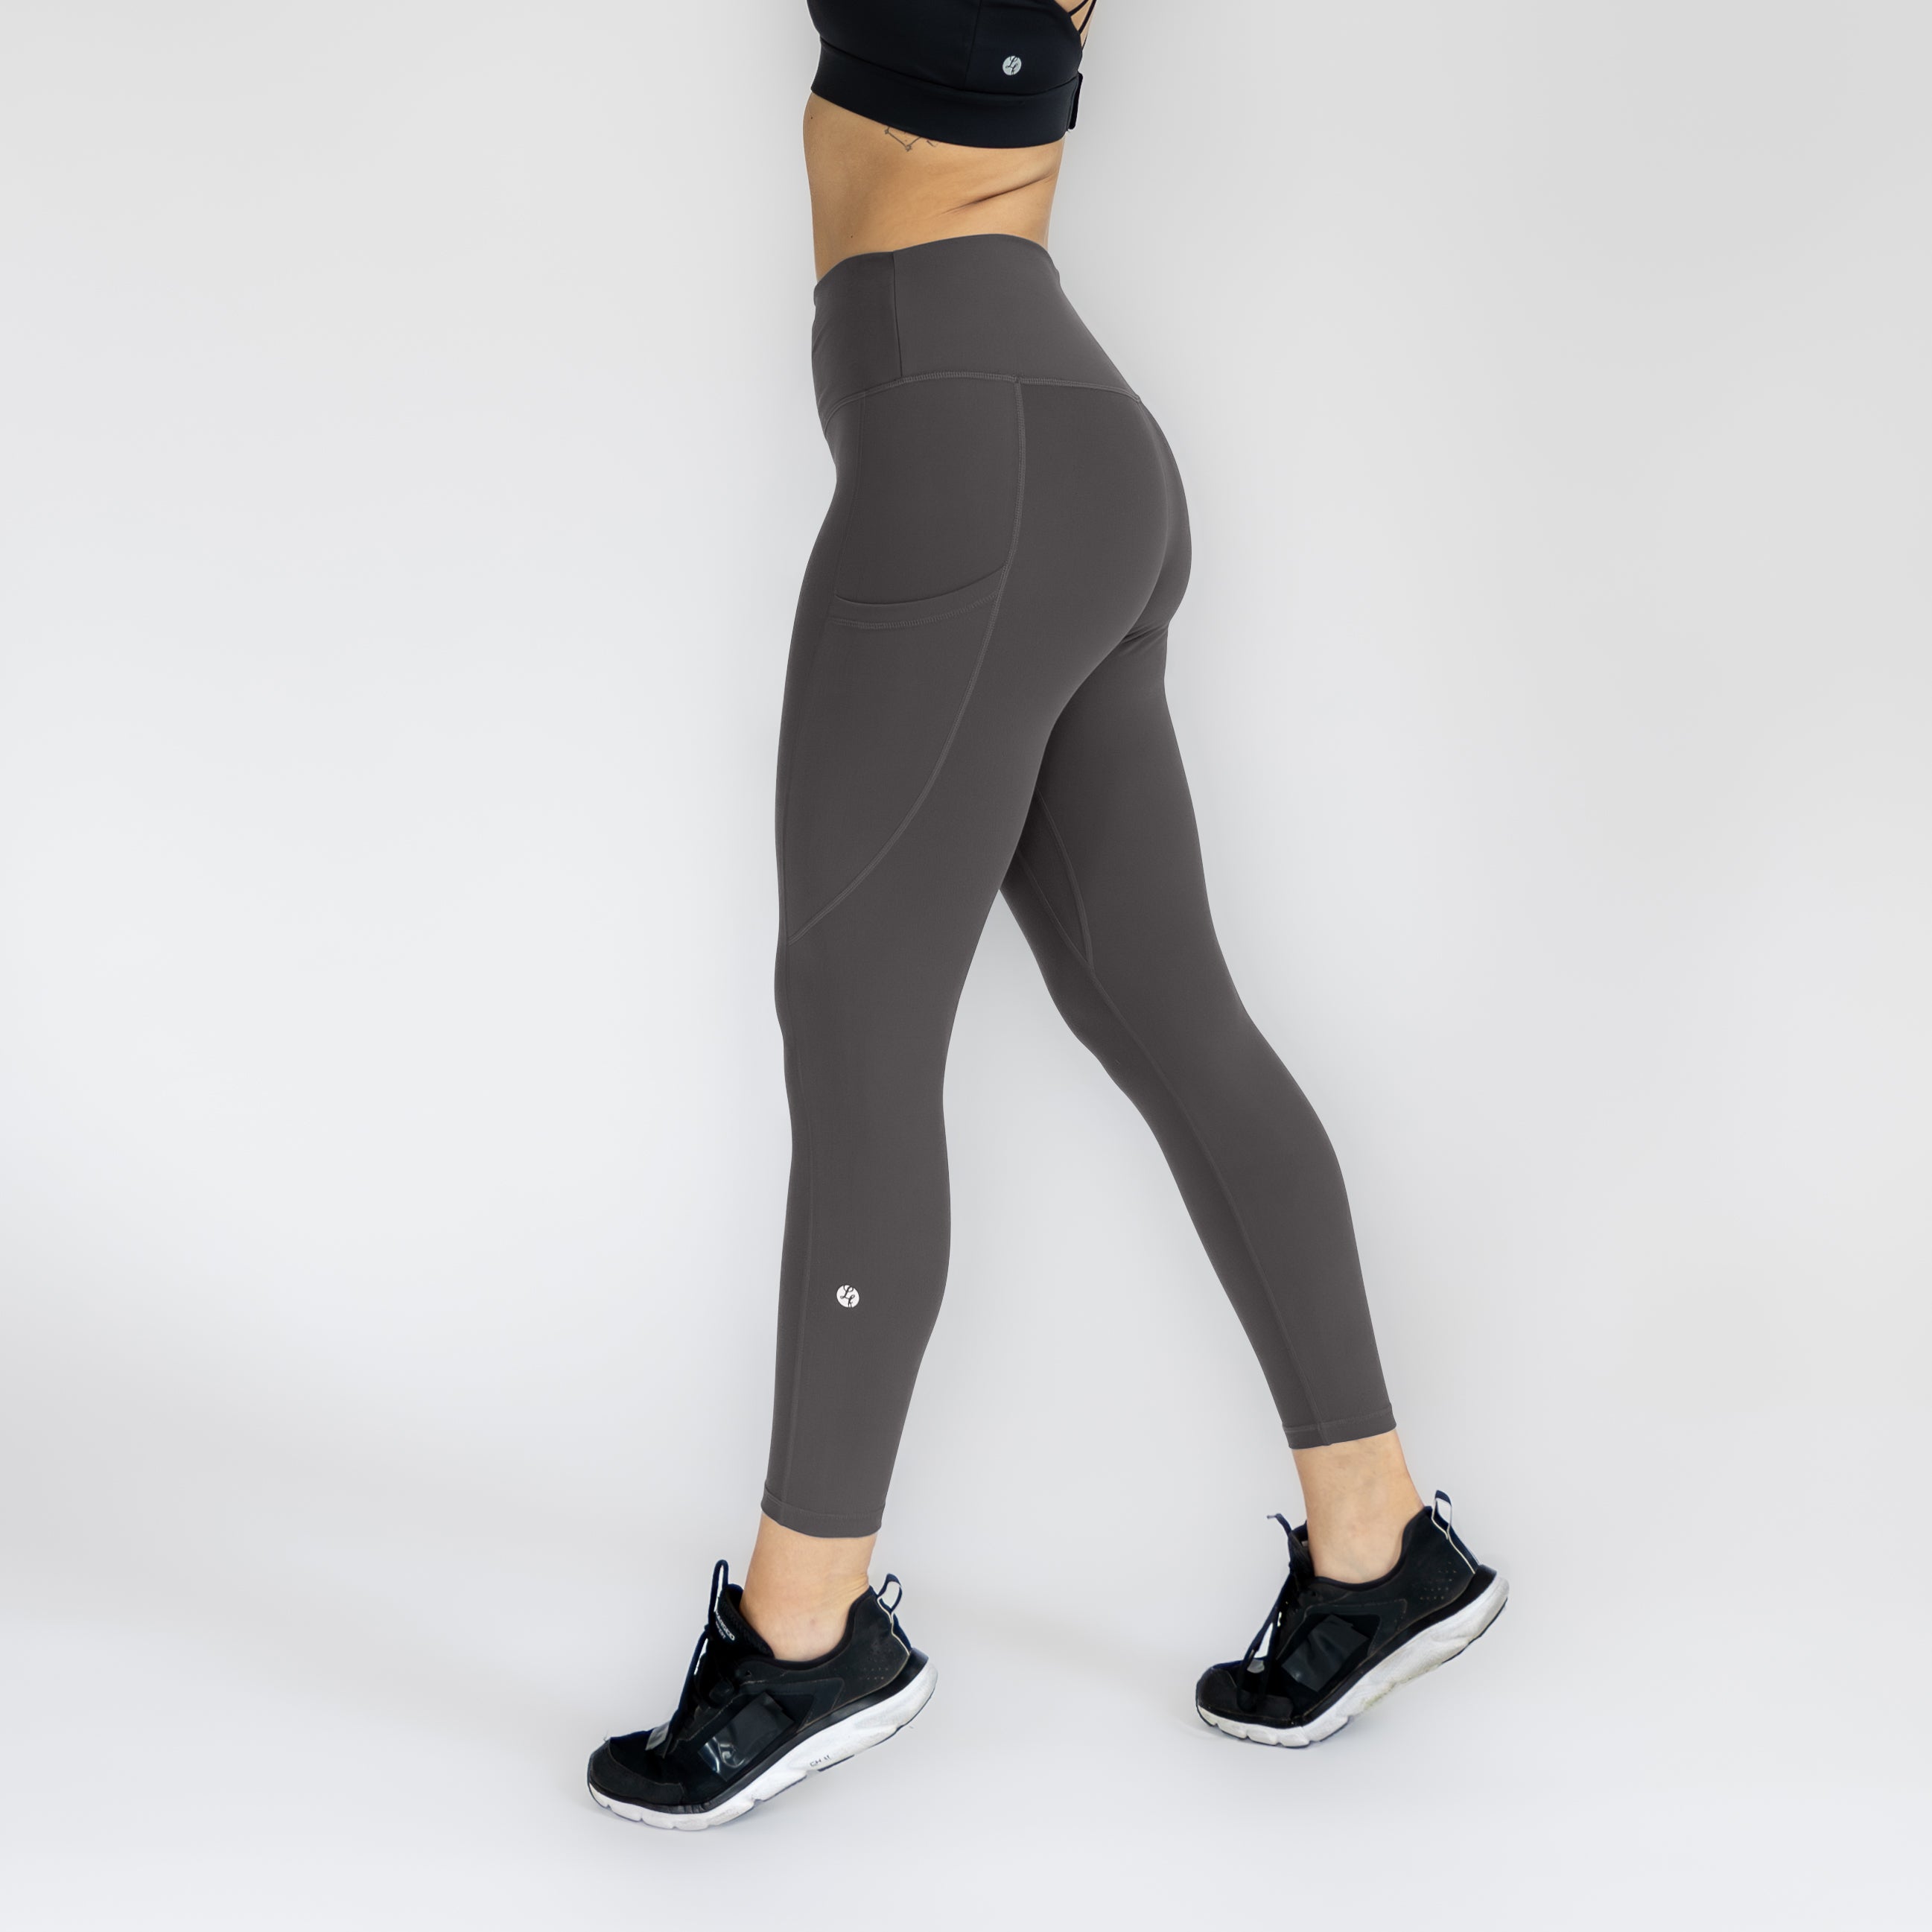 Leggings that love you back! With their perfect fit and endless style  possibilities, you'll never want to part ways. 🛍️ Embrace the